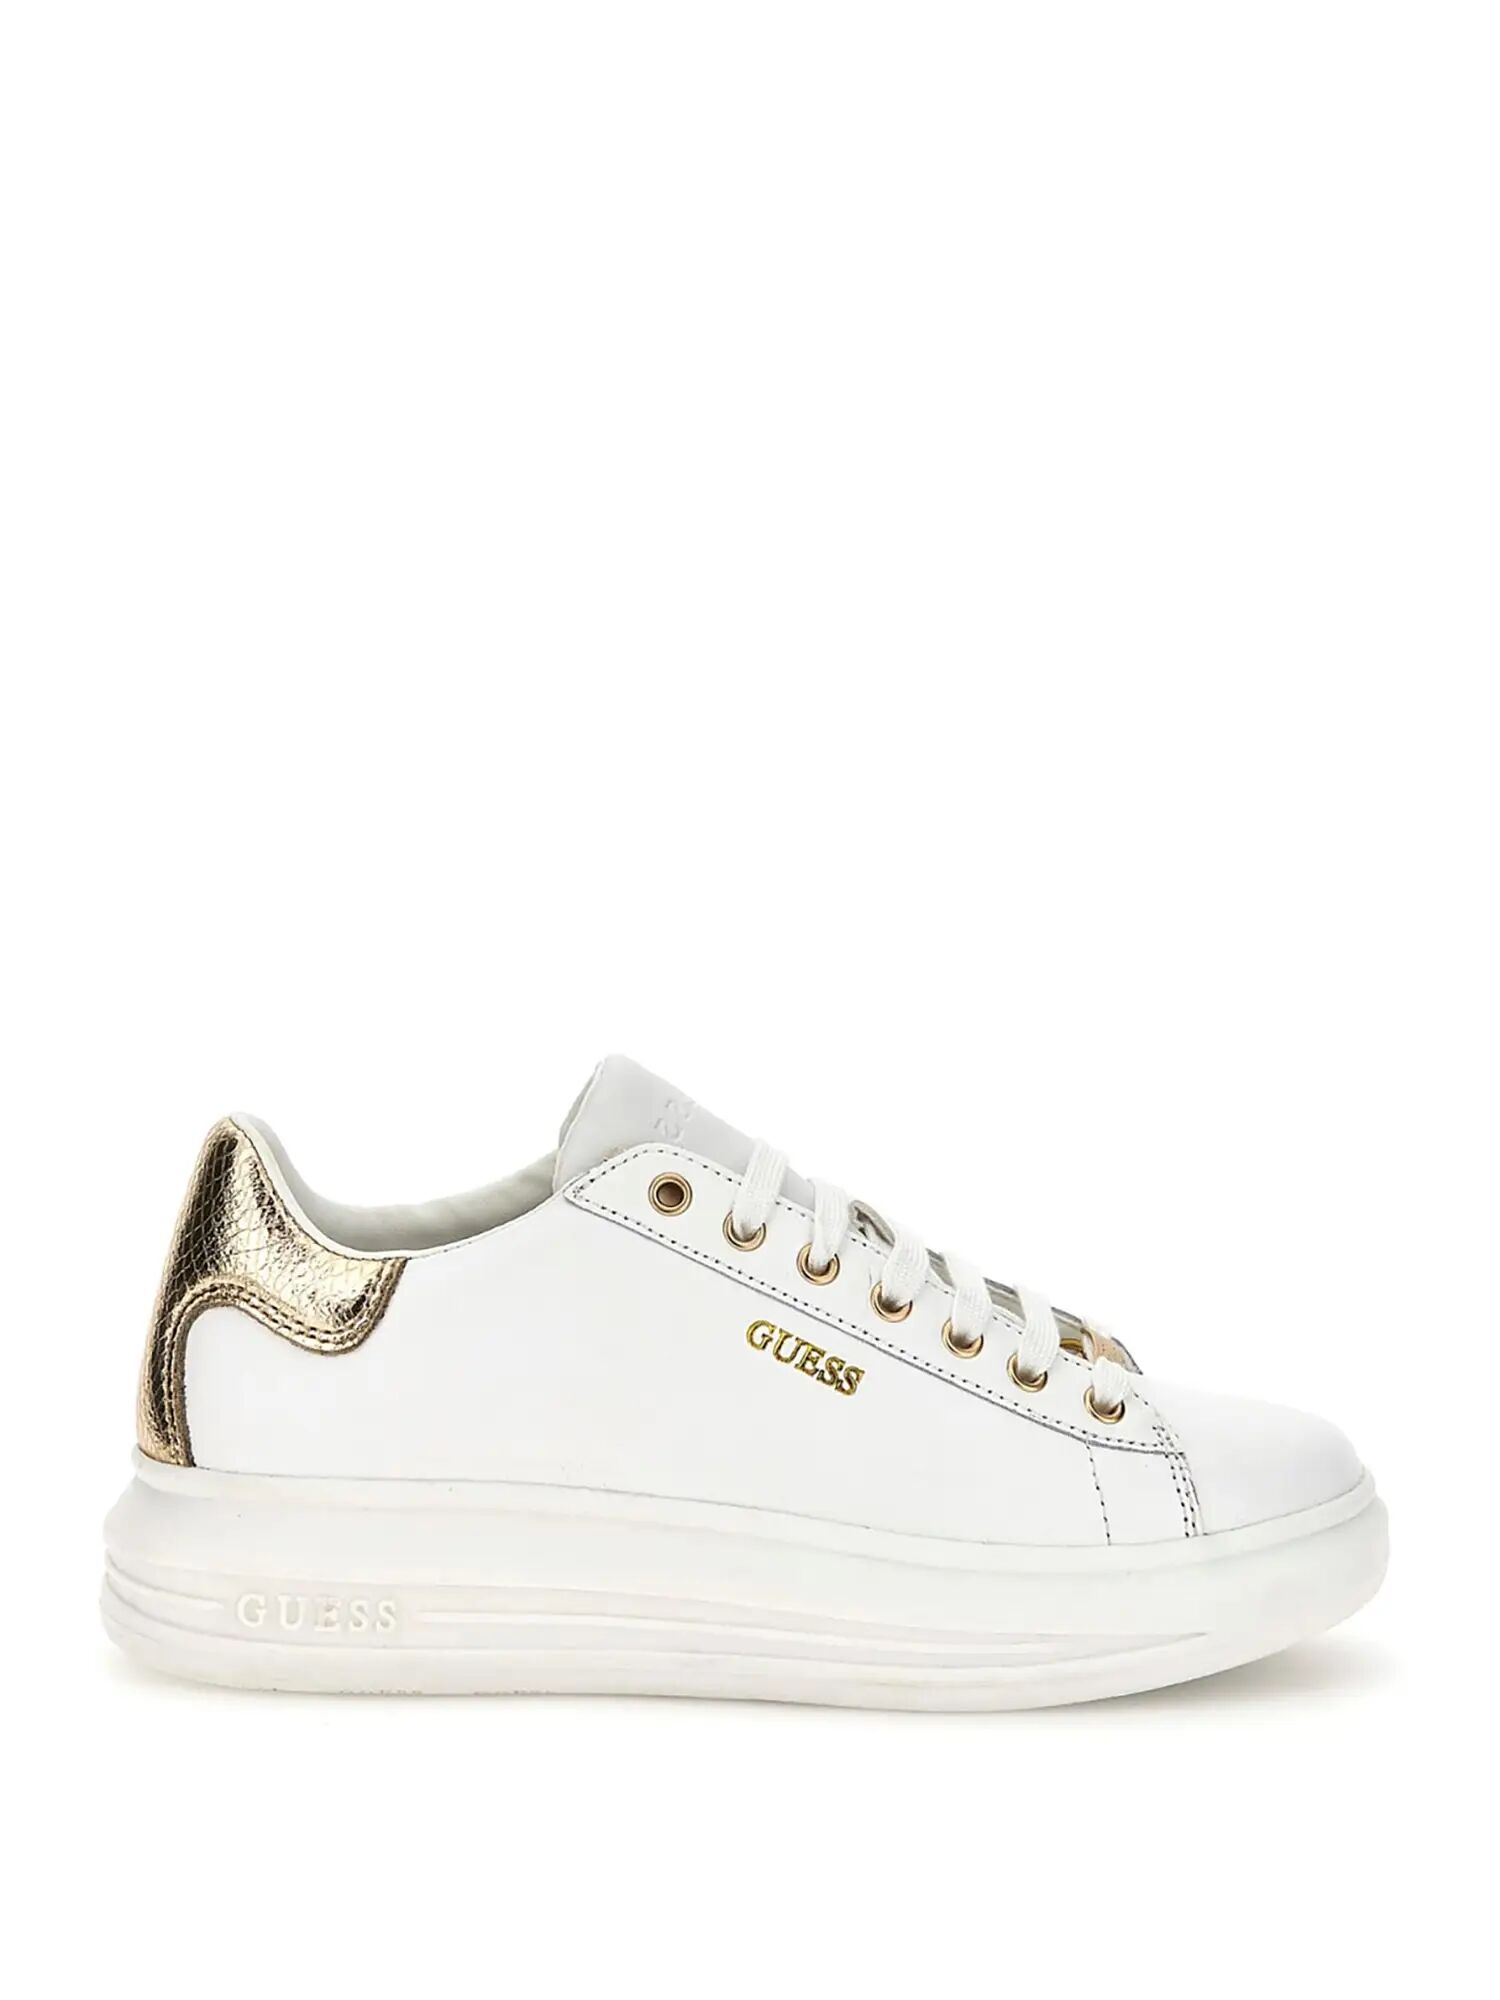 Guess Sneakers Bianche Donna BIANCO/ORO 36